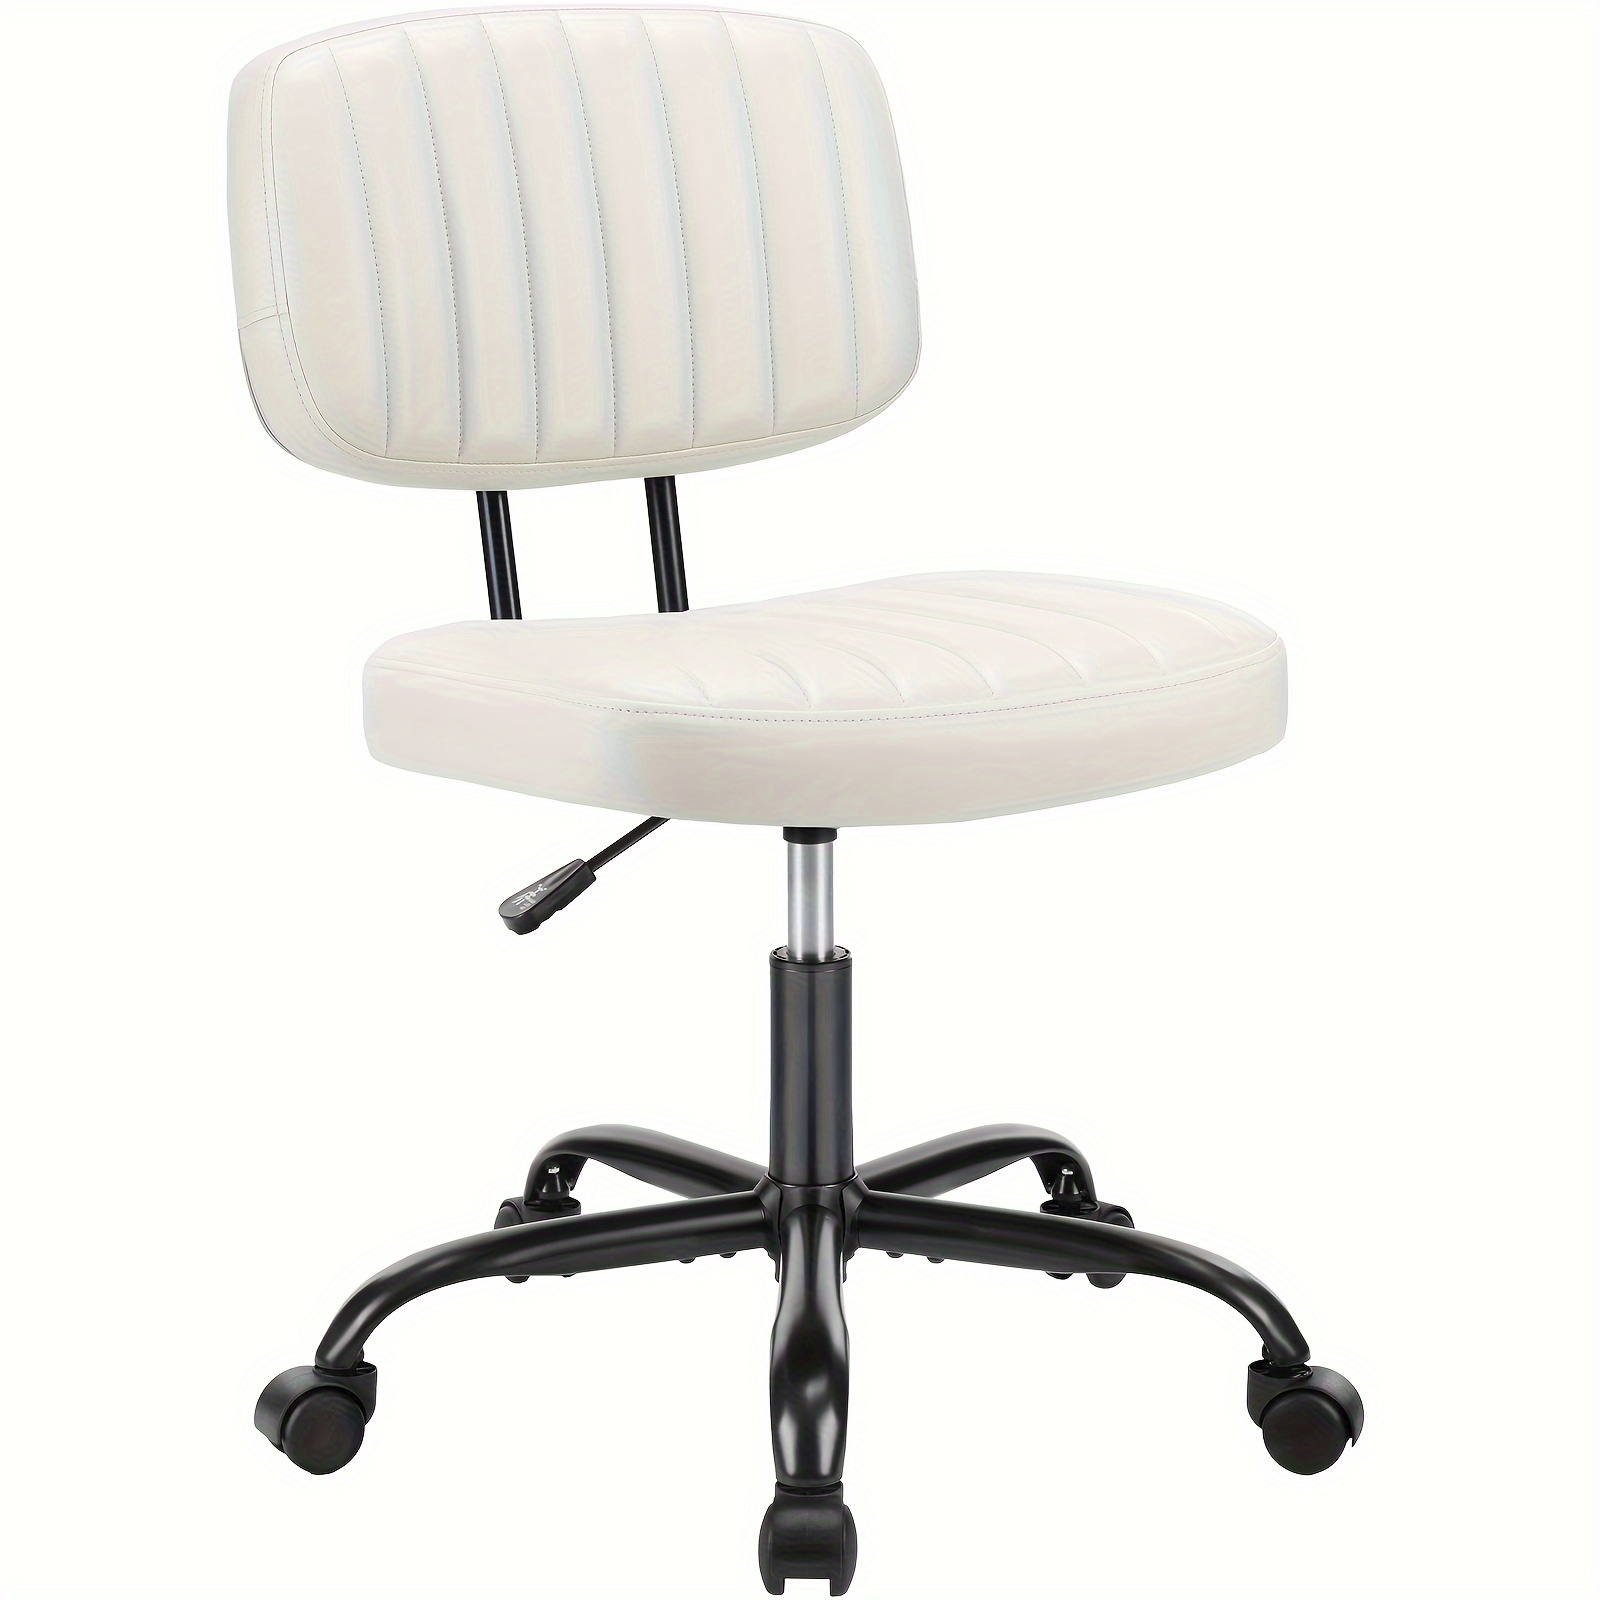 

Armless Home Office Desk Chair - Small Ergonomic With Low Back Lumbar Support, Height Adjustable Pu Leather Computer Task With 360° Rolling Wheels, For Small Space